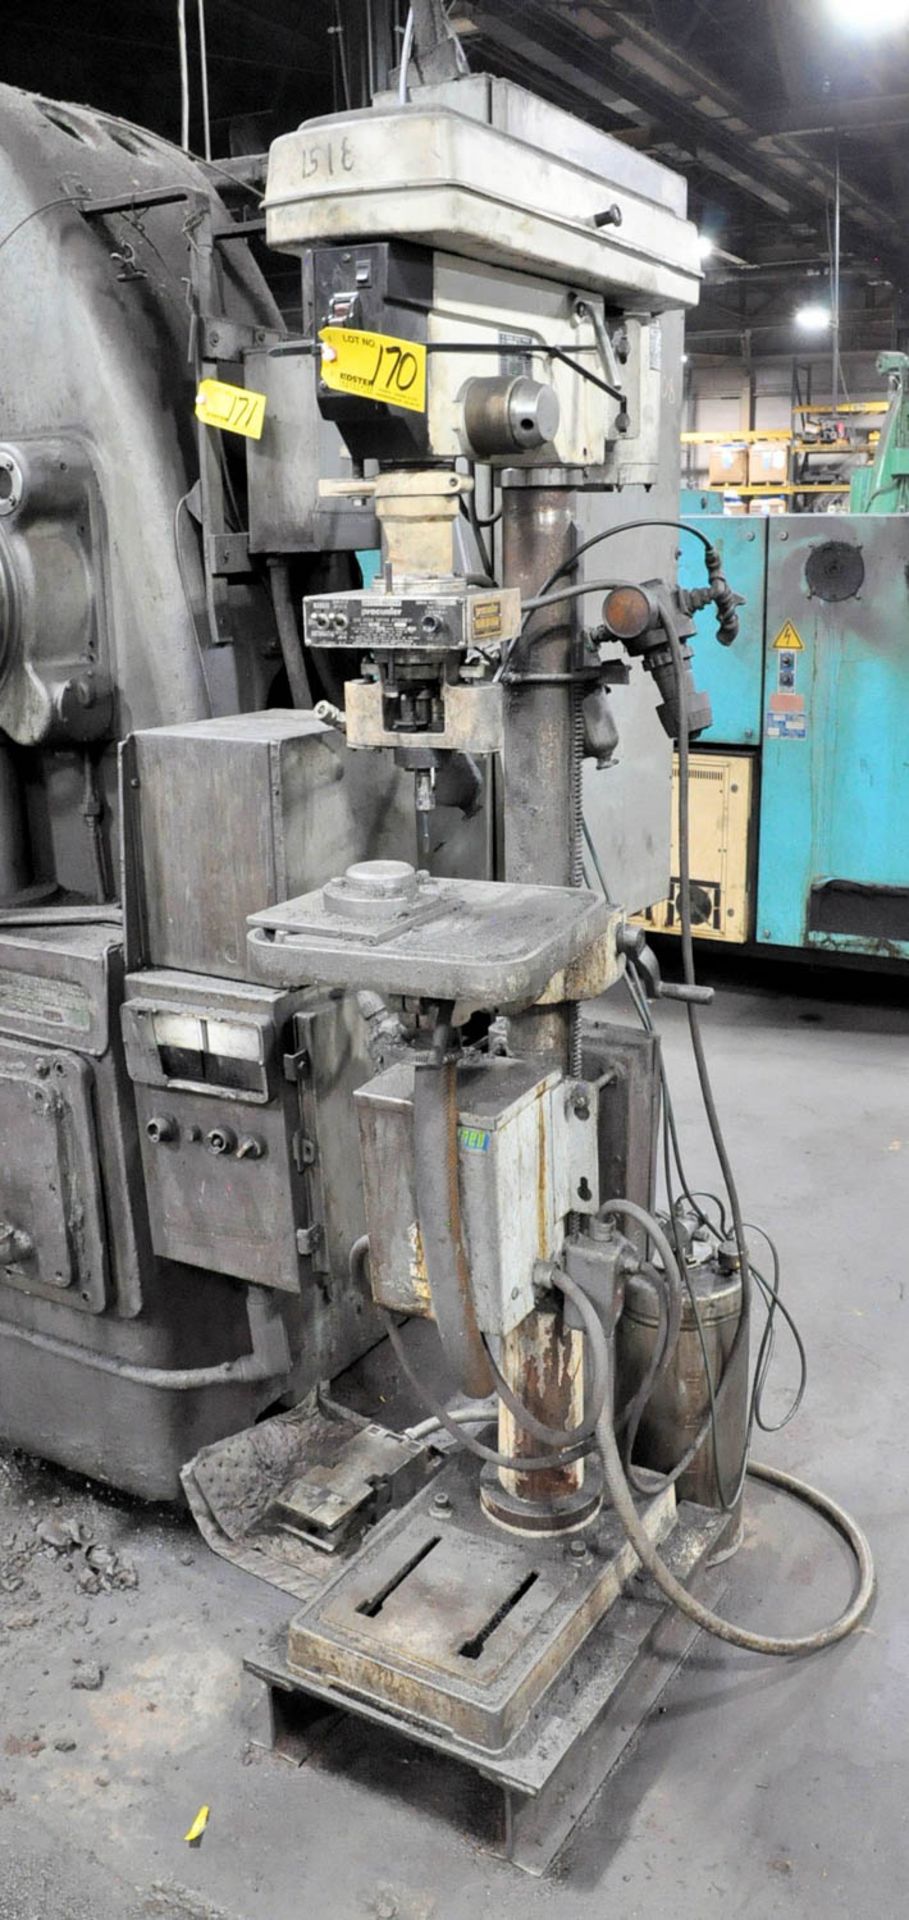 PROCUNIER MDL. 793.12888851, 17" FLOOR STANDING SINGLE SPINDLE TAPPING MACHINE, S/N: 271732 (